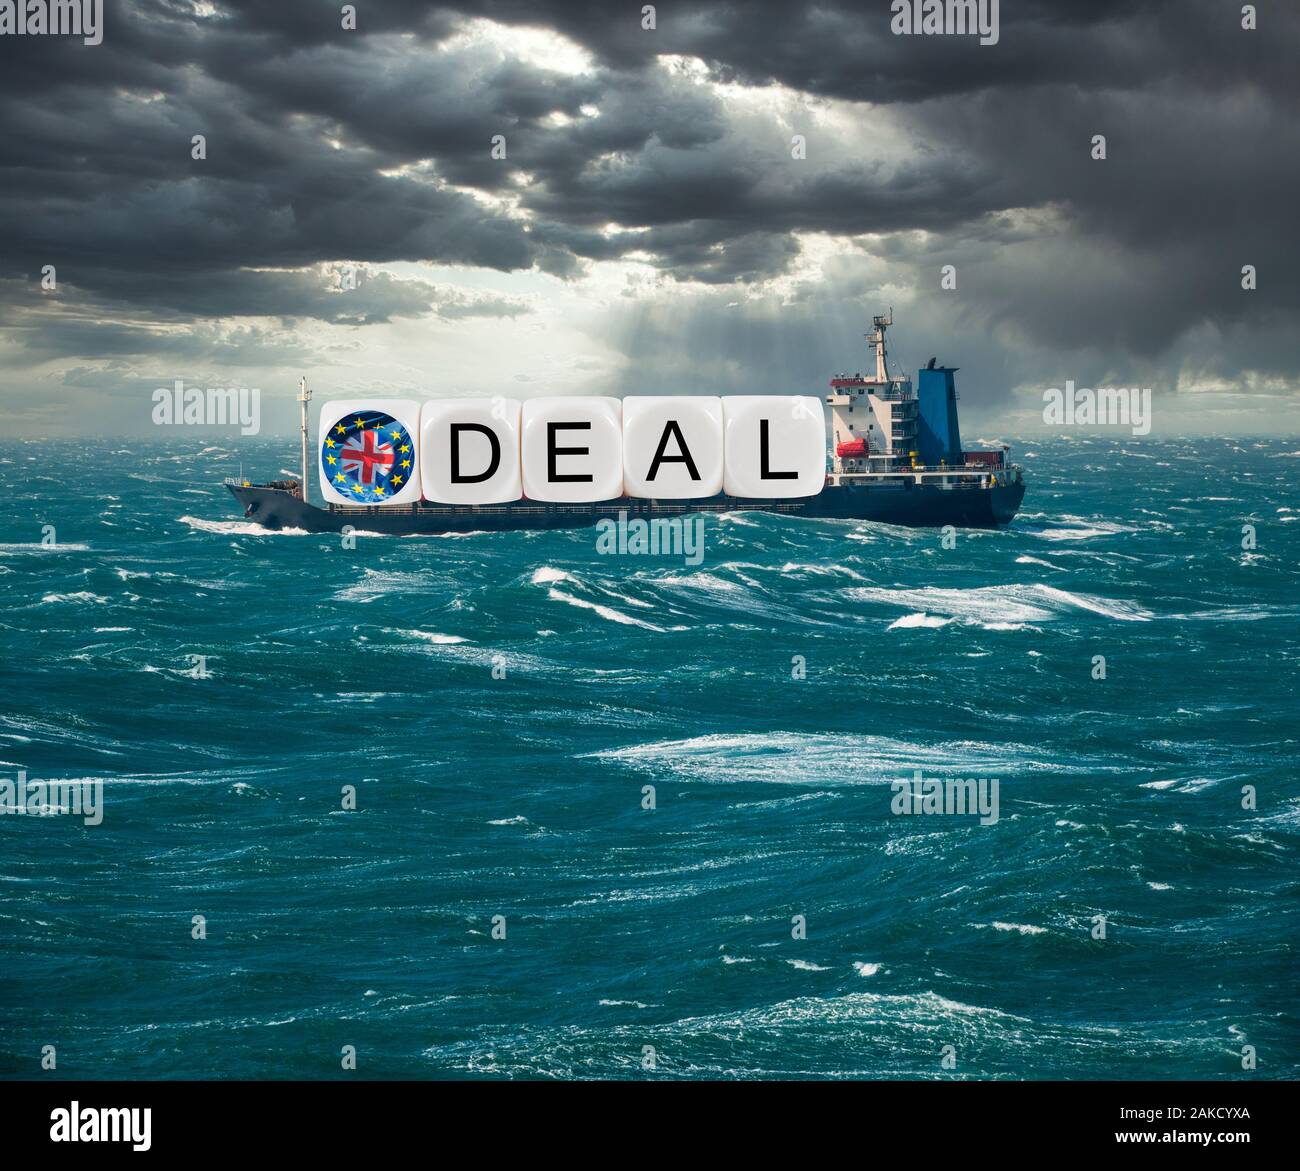 Global trading with container ship carrying Brexit deal concept for December 2020 if no trade deal with EU happens and no deal exit results Stock Photo